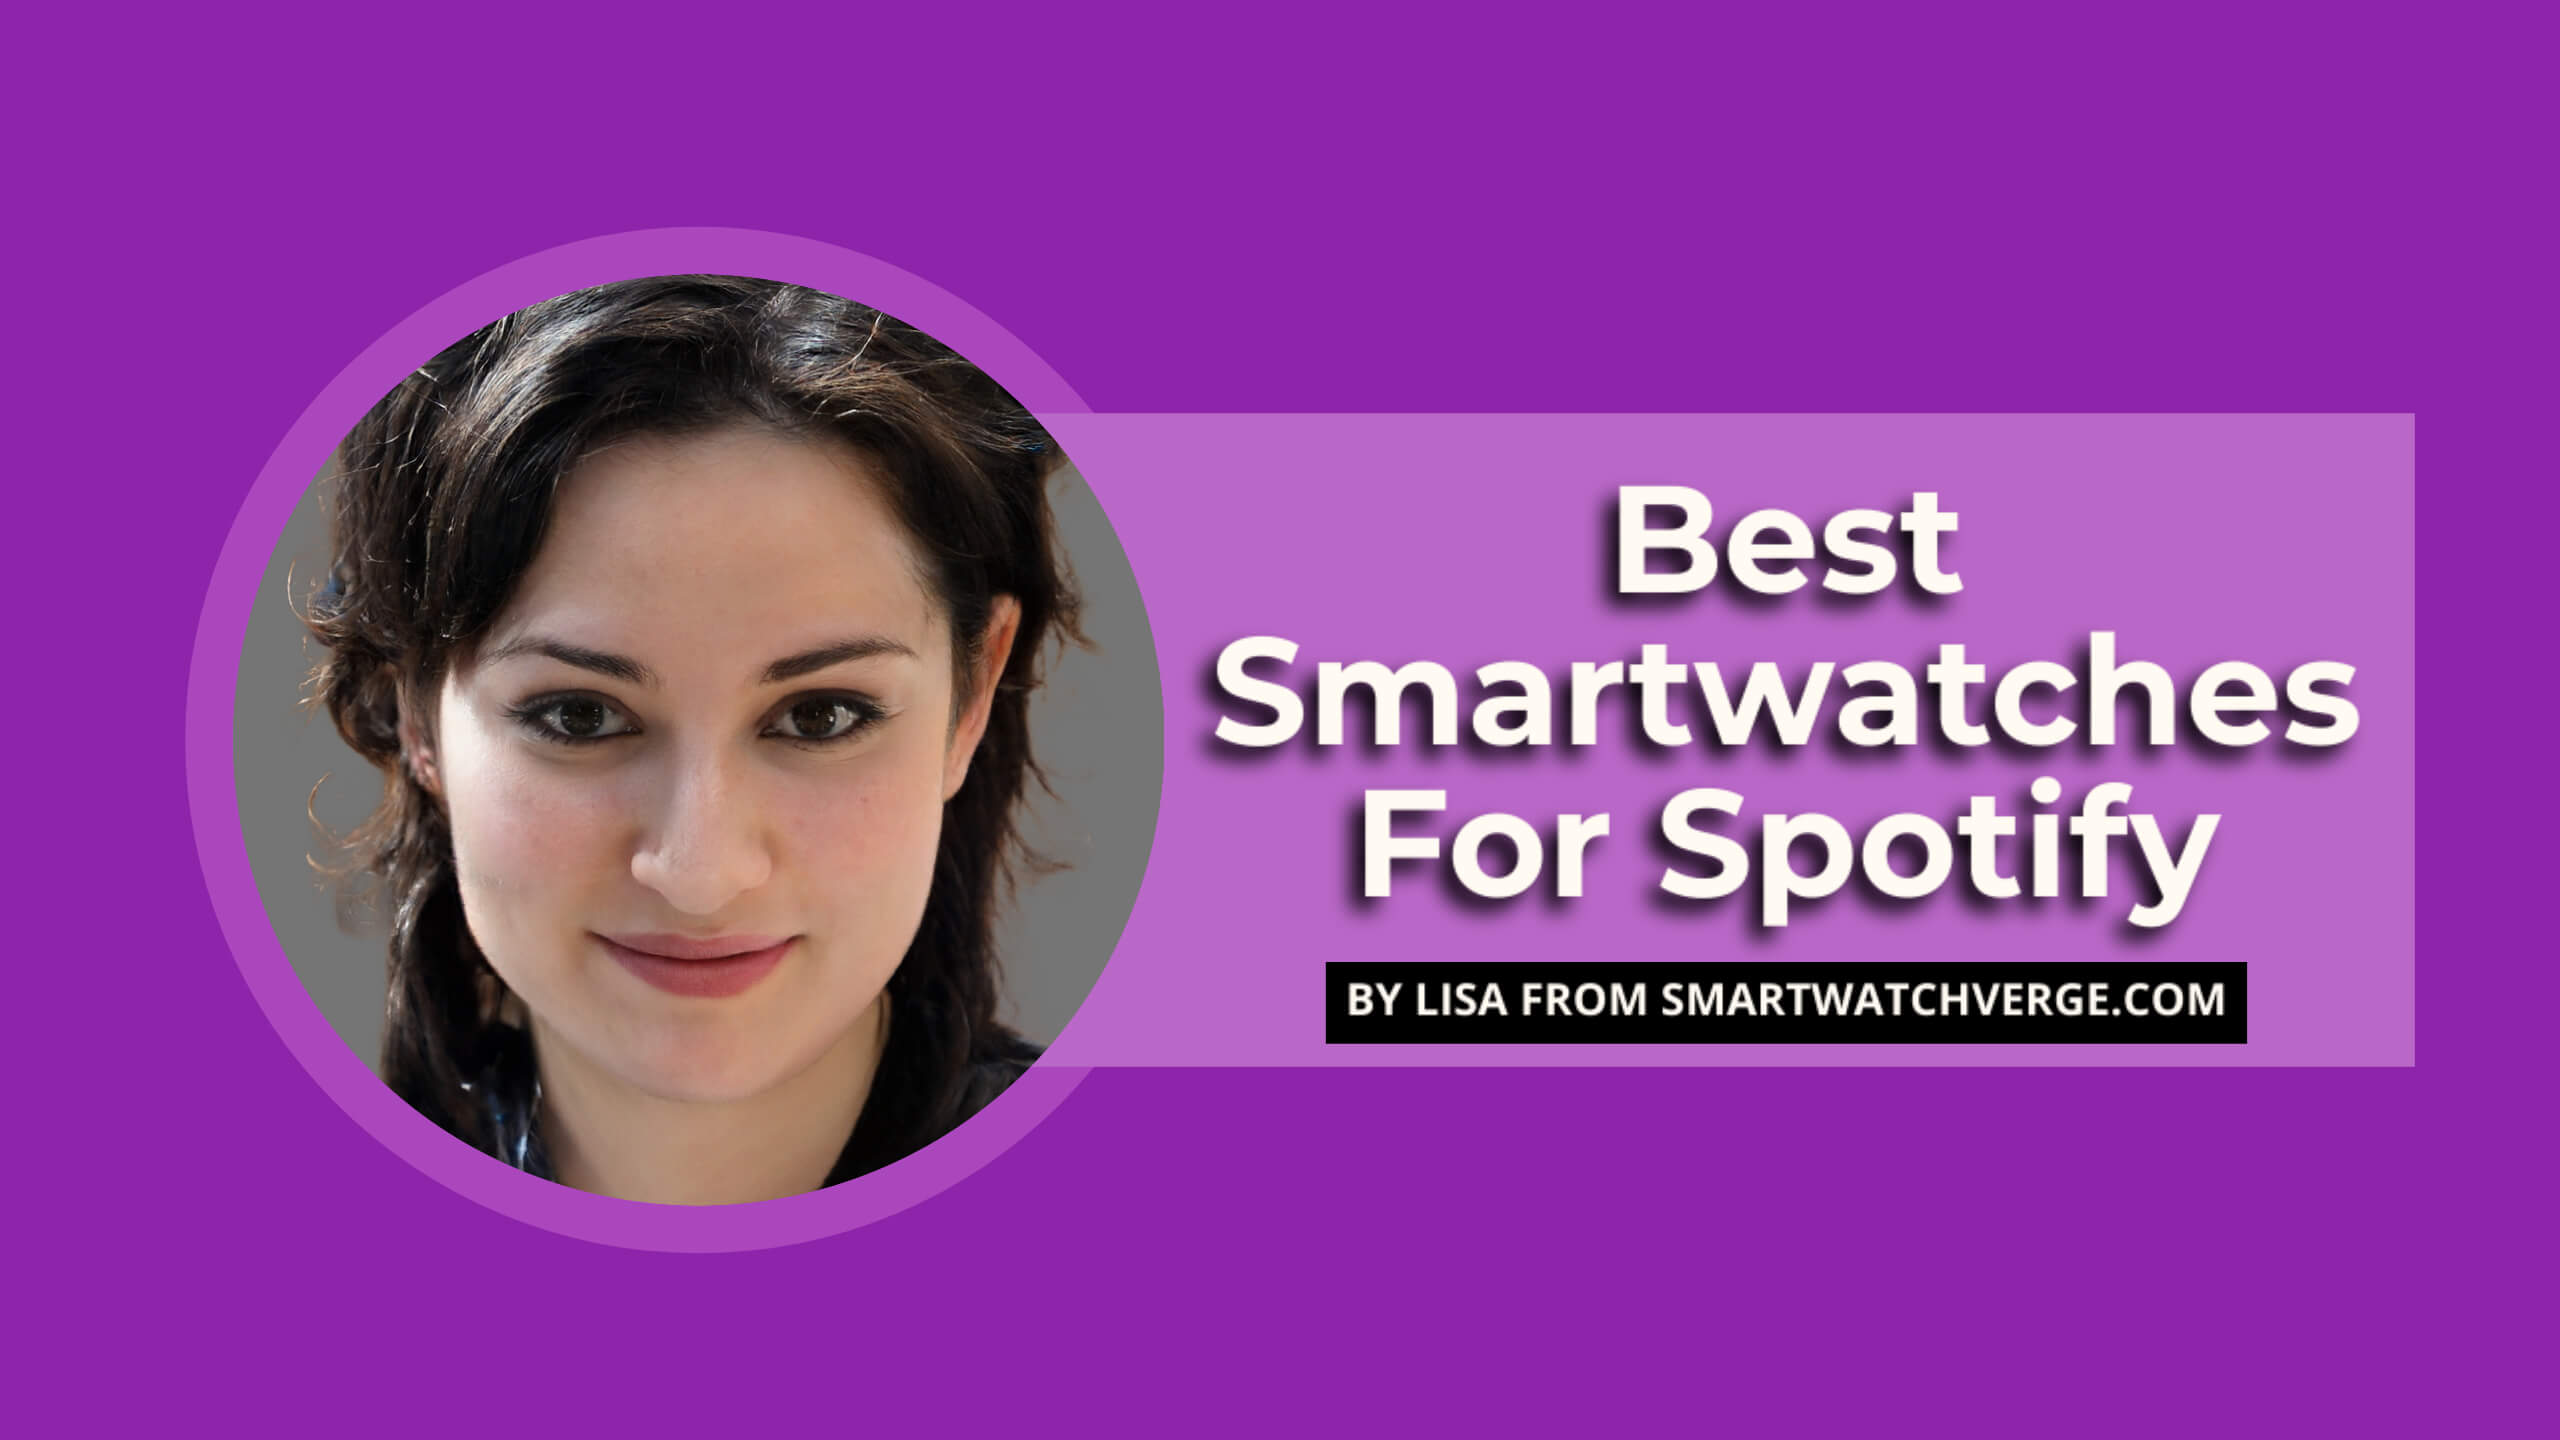 Best Smartwatches For Spotify